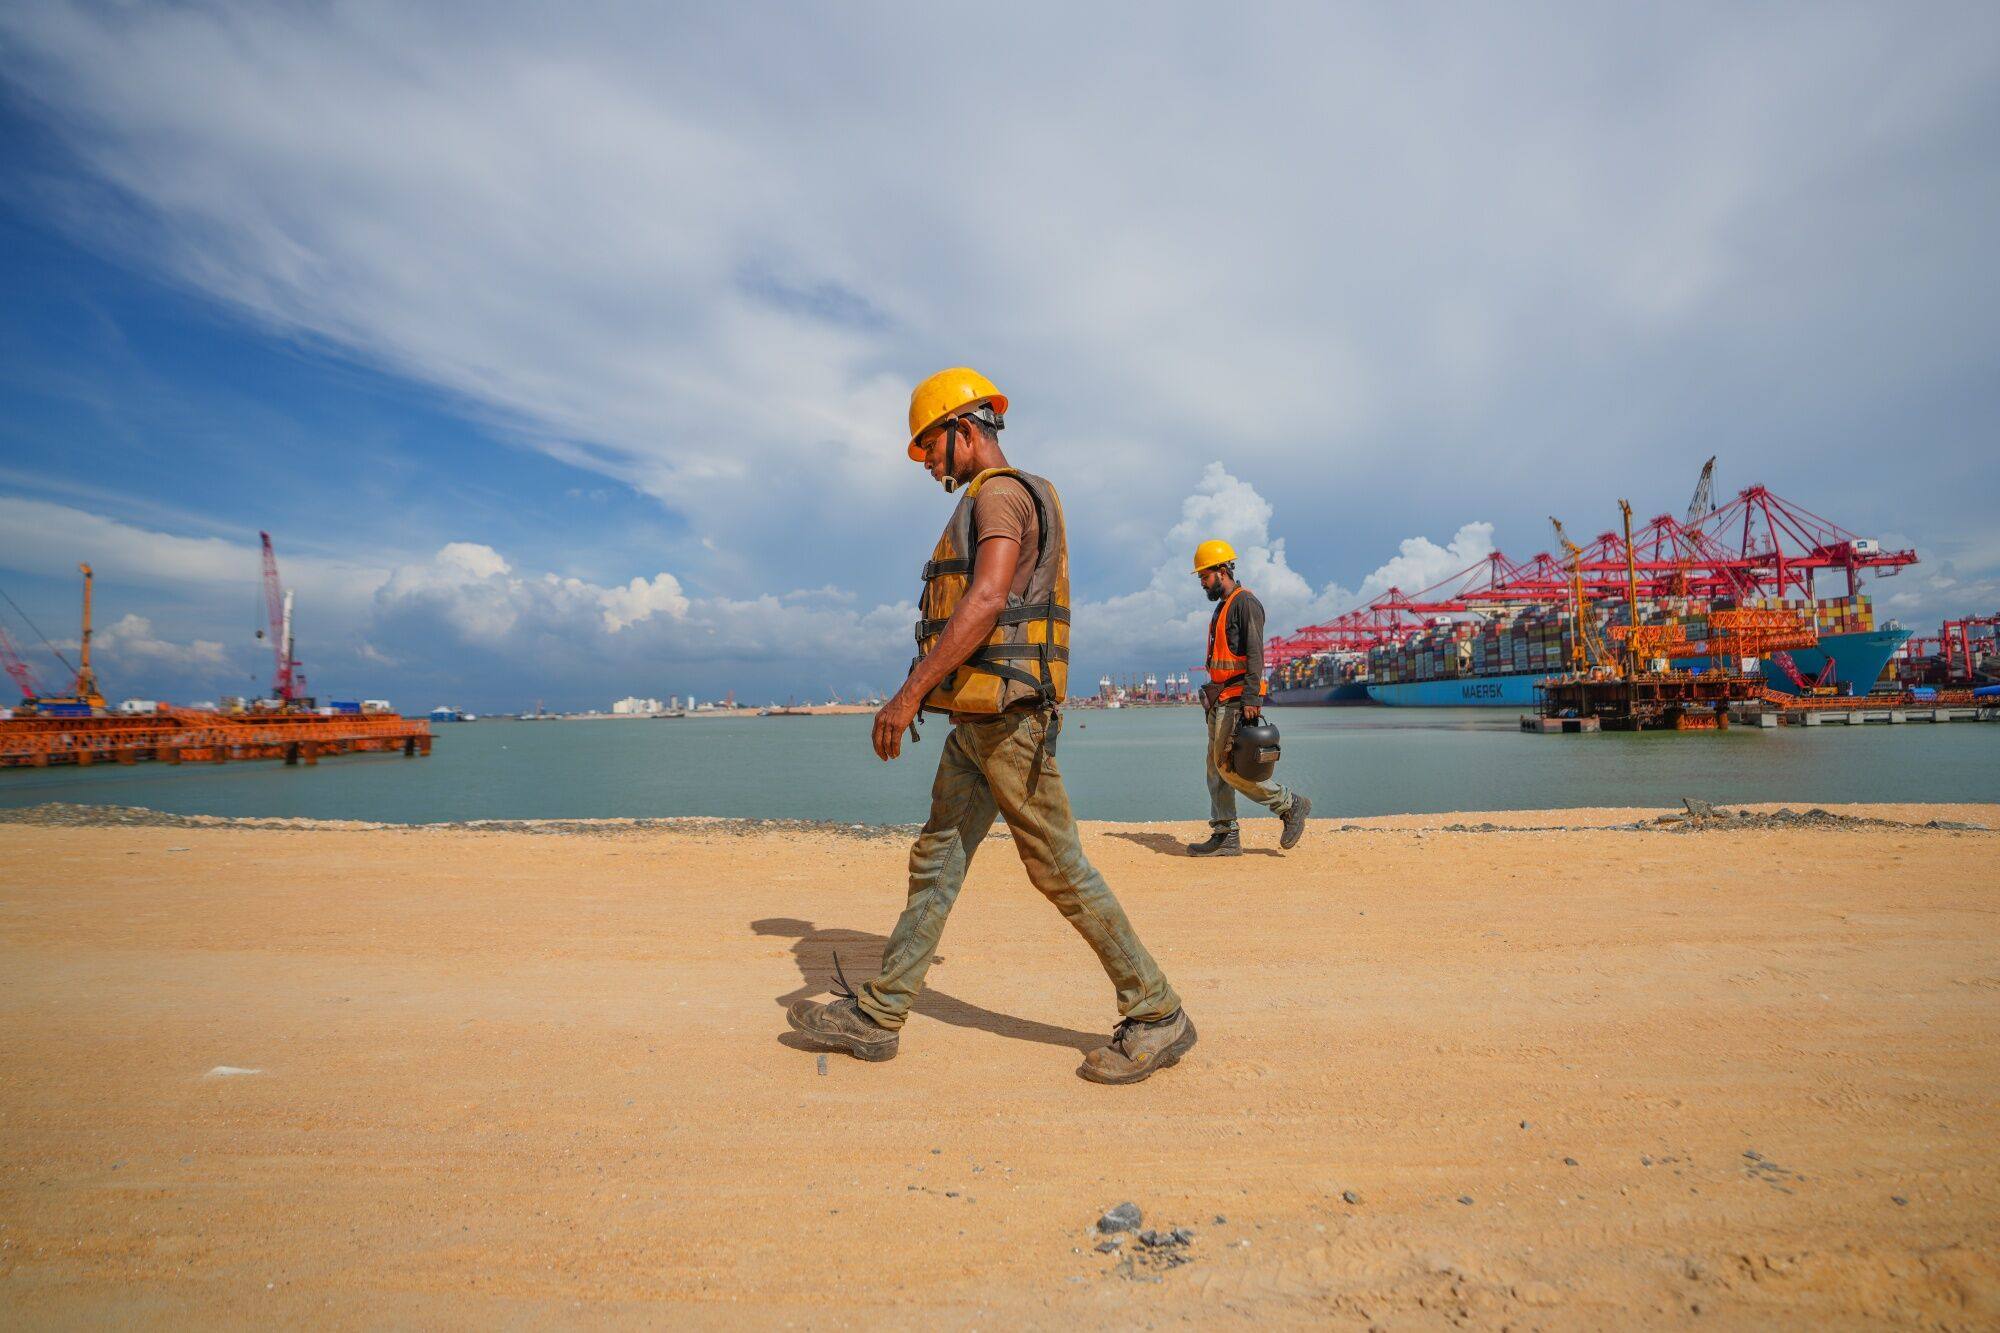 The US will provide US$553 million in financing for a port terminal in Sri Lanka’s capital being developed by Indian billionaire Gautam Adani, as New Delhi and Washington look to curtail China’s influence in South Asia. Photo: Bloomberg